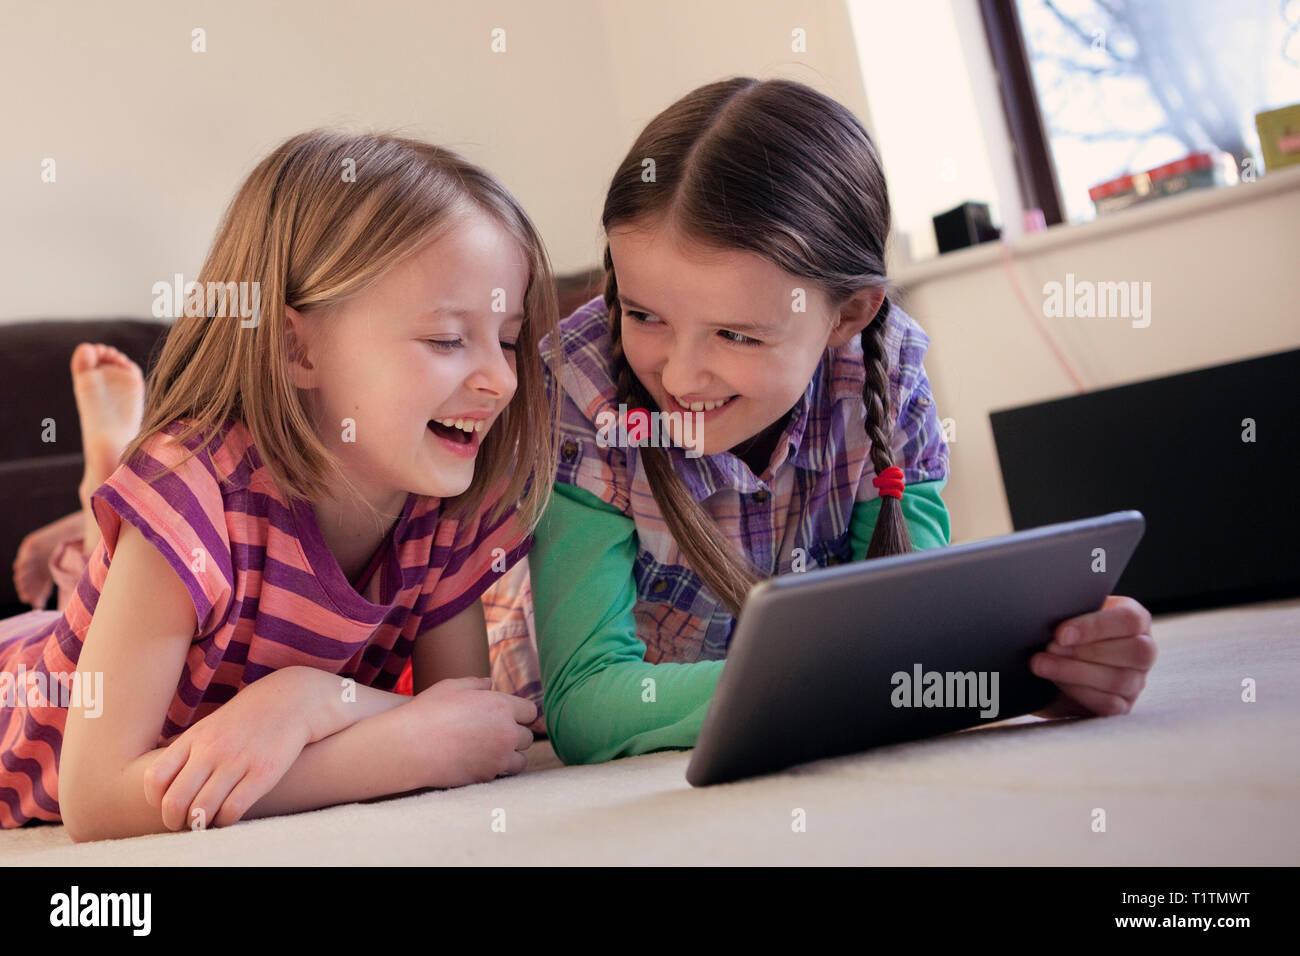 Two happy, laughing children using a tablet device together Stock Photo